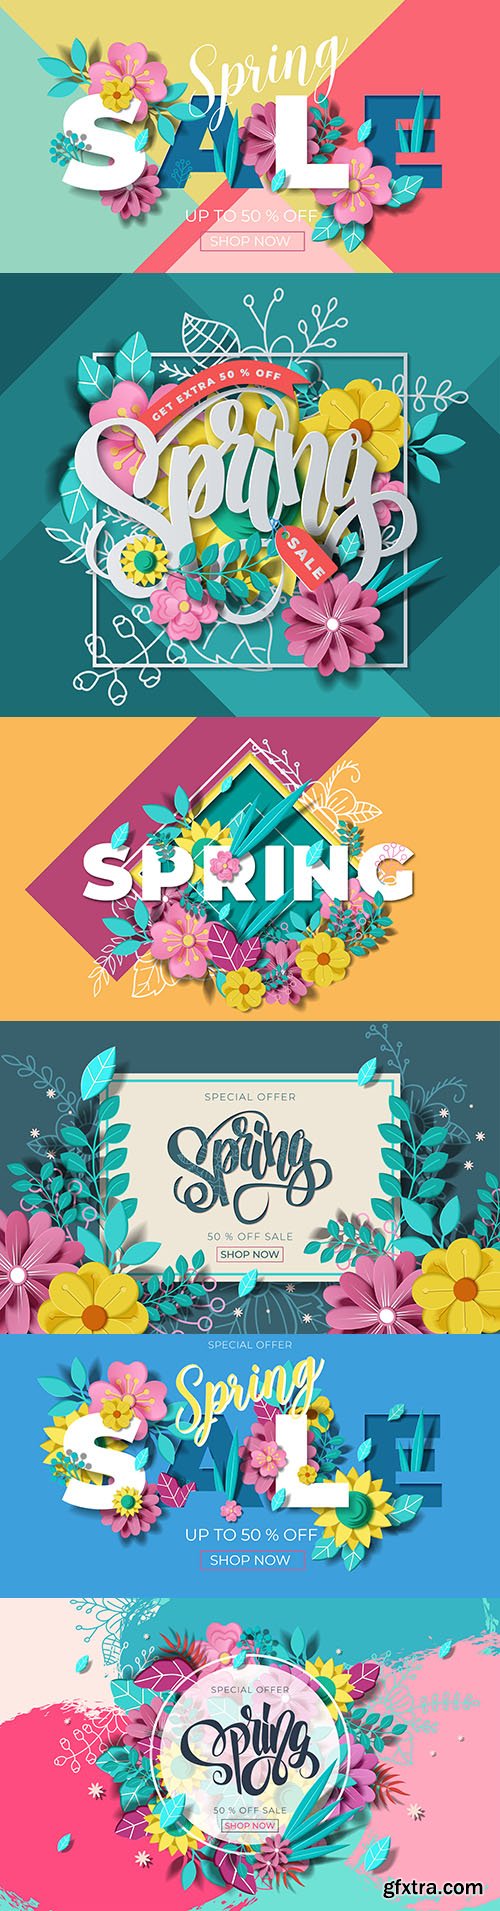 Spring sale banner with beautiful colorful flowers
